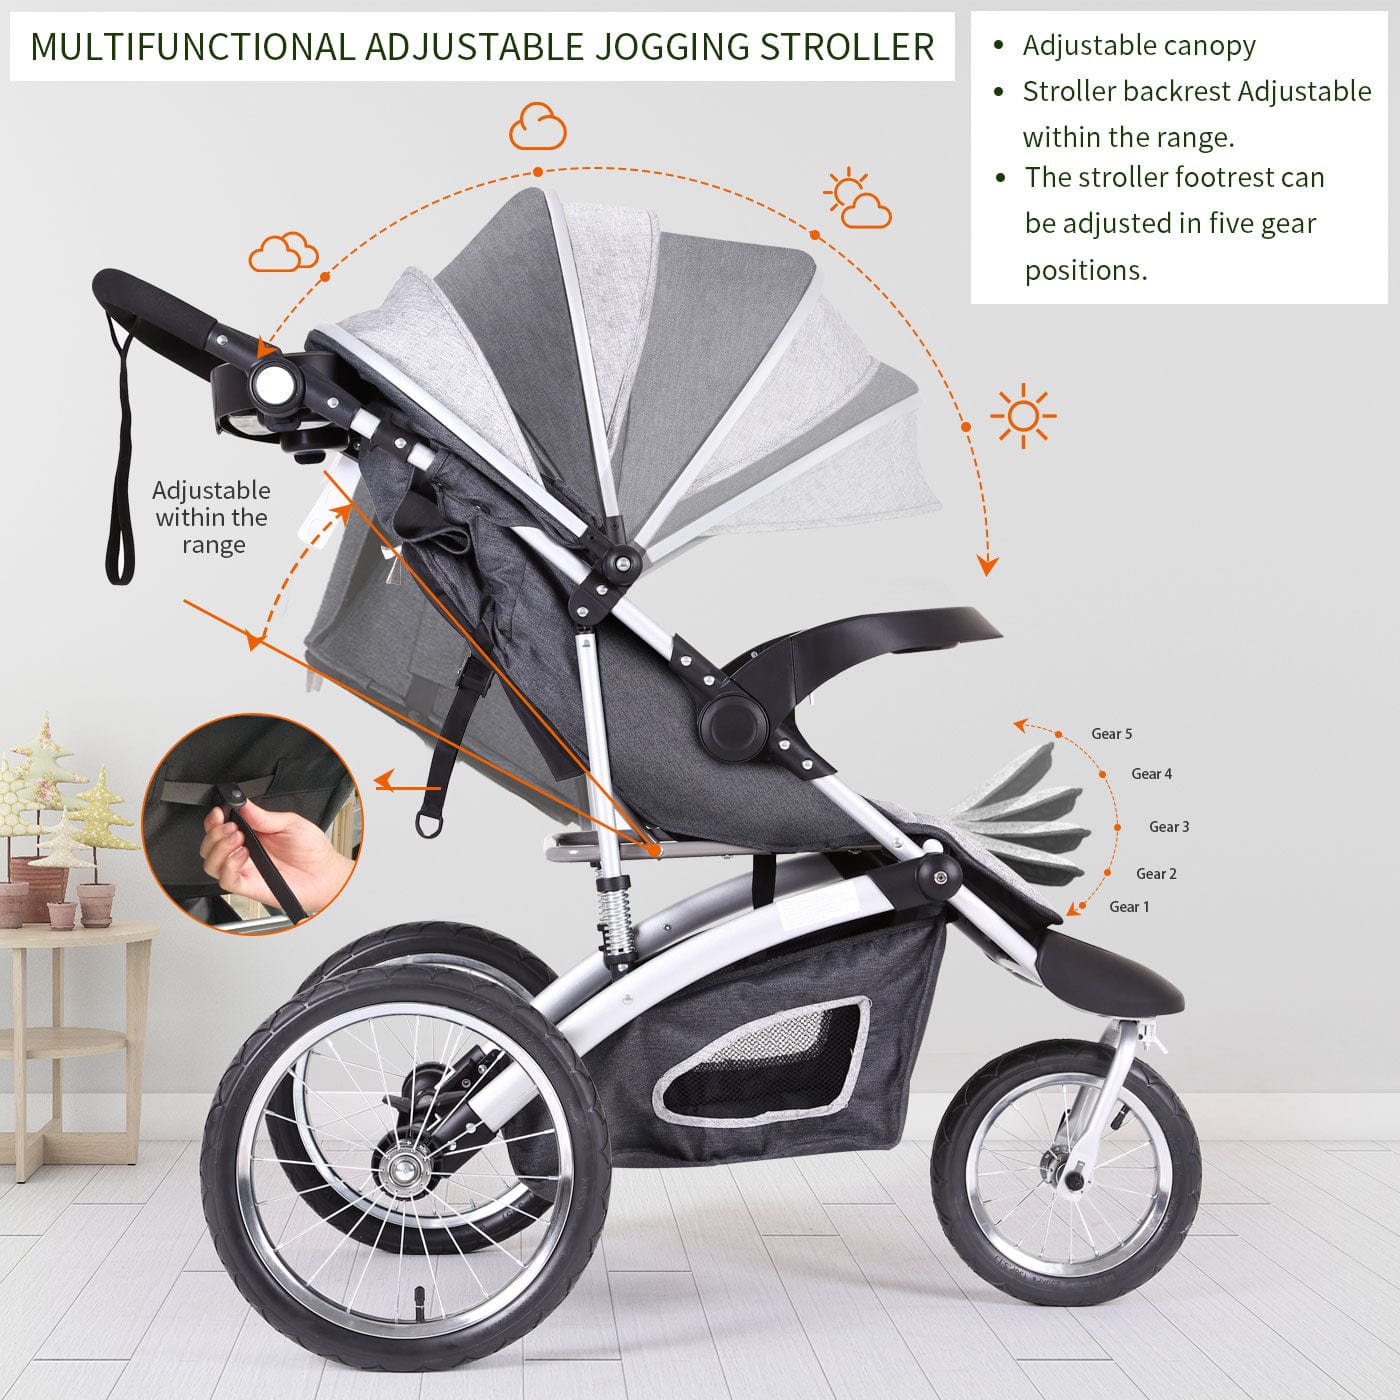 Proactive Baby Jogging Stroller Foldable Jogging Stroller Single Toddler Stroller Jogging Compact Ultra-light Stroller Can be Carried for Trave